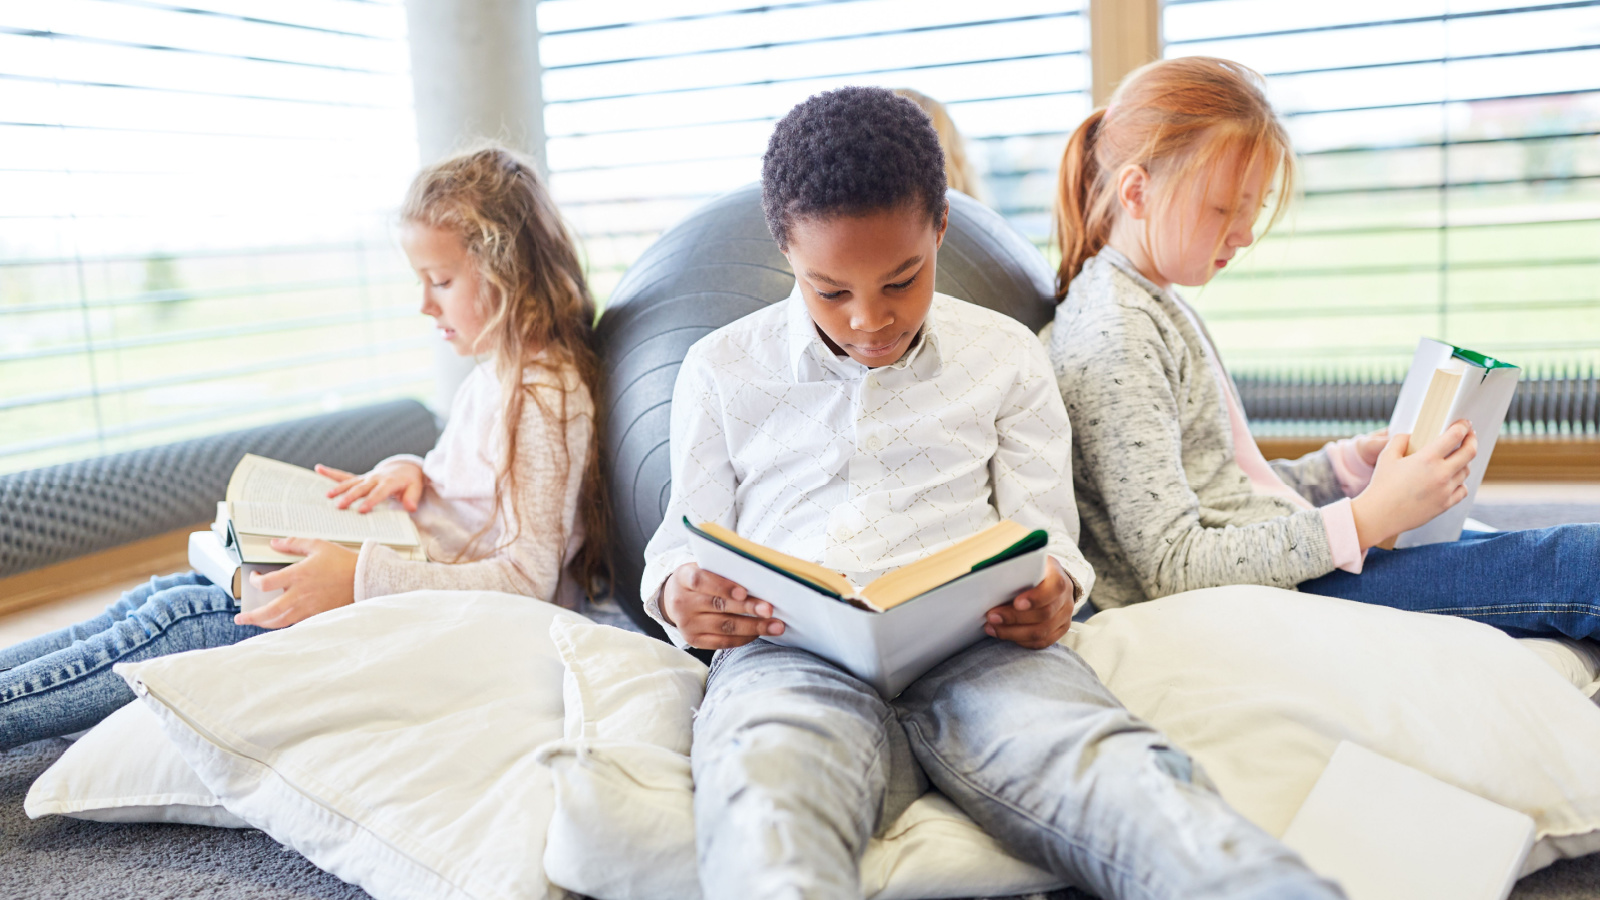 image credit: Robert Kneschke/Shutterstock <p><span>Despite some schools in California adopting the “science of reading,” others continue to use balanced literacy or whole language approaches. This ongoing debate, known as the “reading wars,” underscores the critical importance of literacy in achieving educational and life success. This bill would impose a statewide requirement on schools rather than relying on districts to determine their own approach on a case-by-case basis. </span></p>